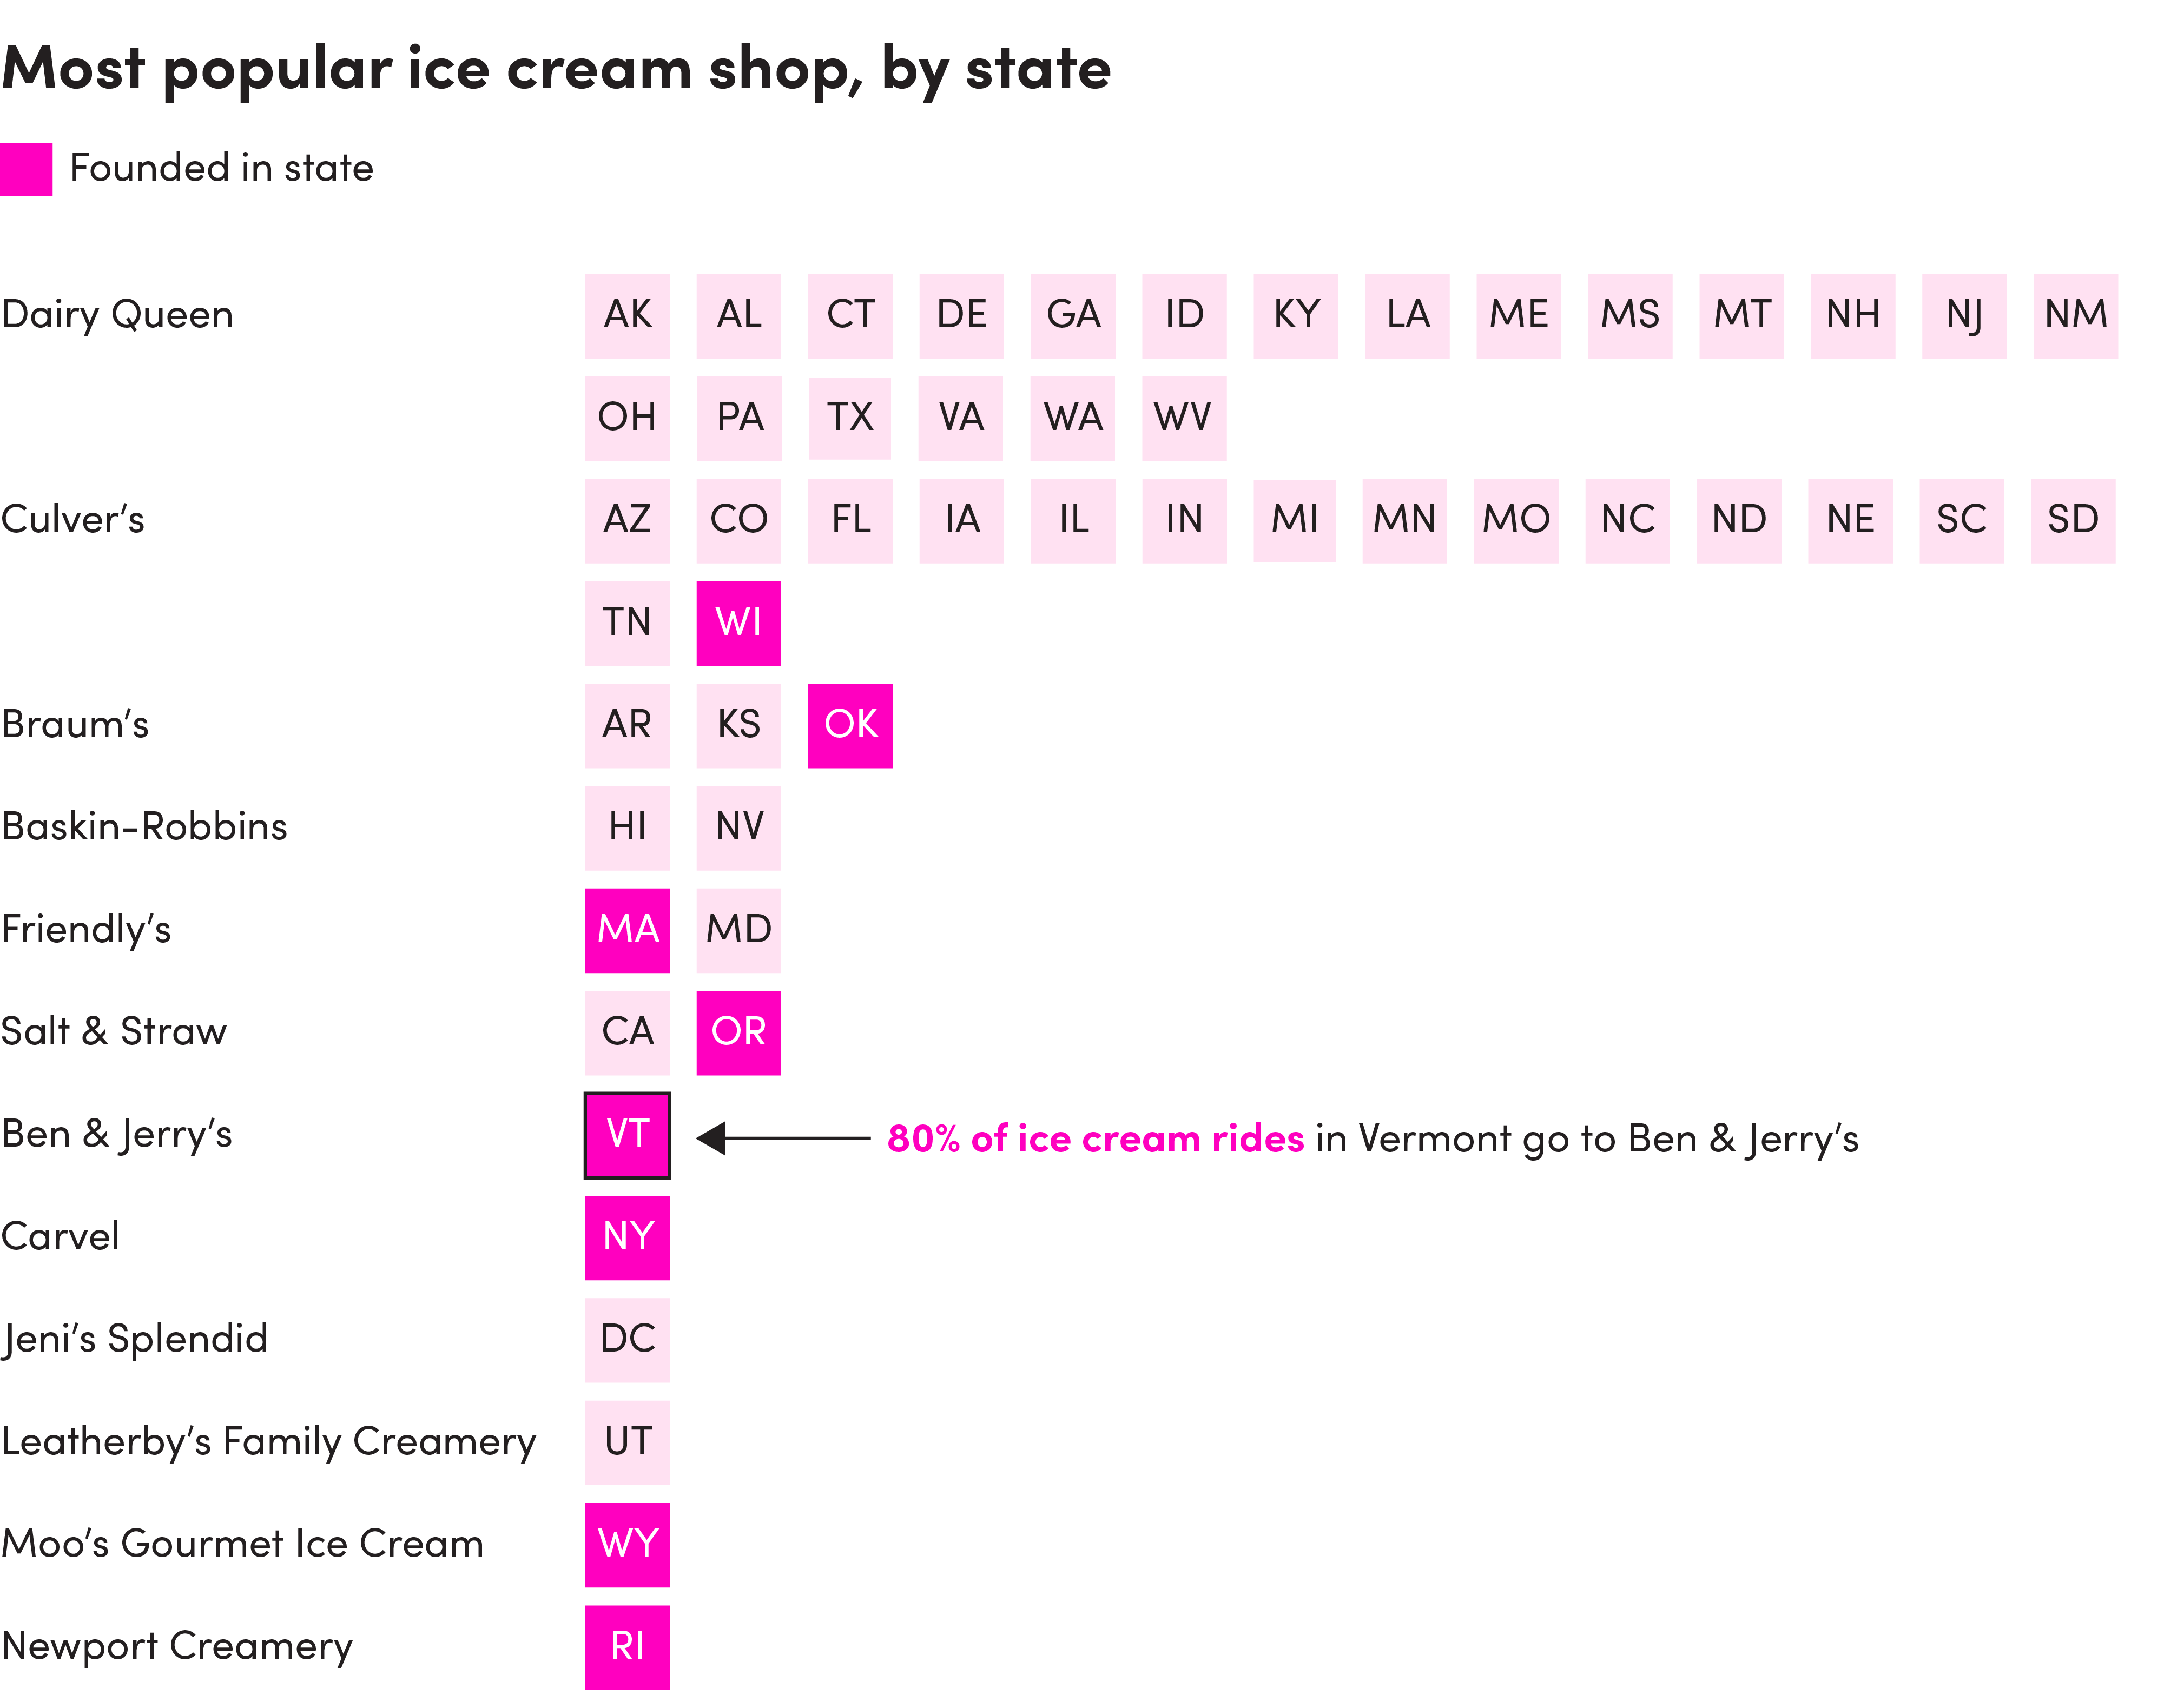 Graphic showing most popular ice cream shops by state.